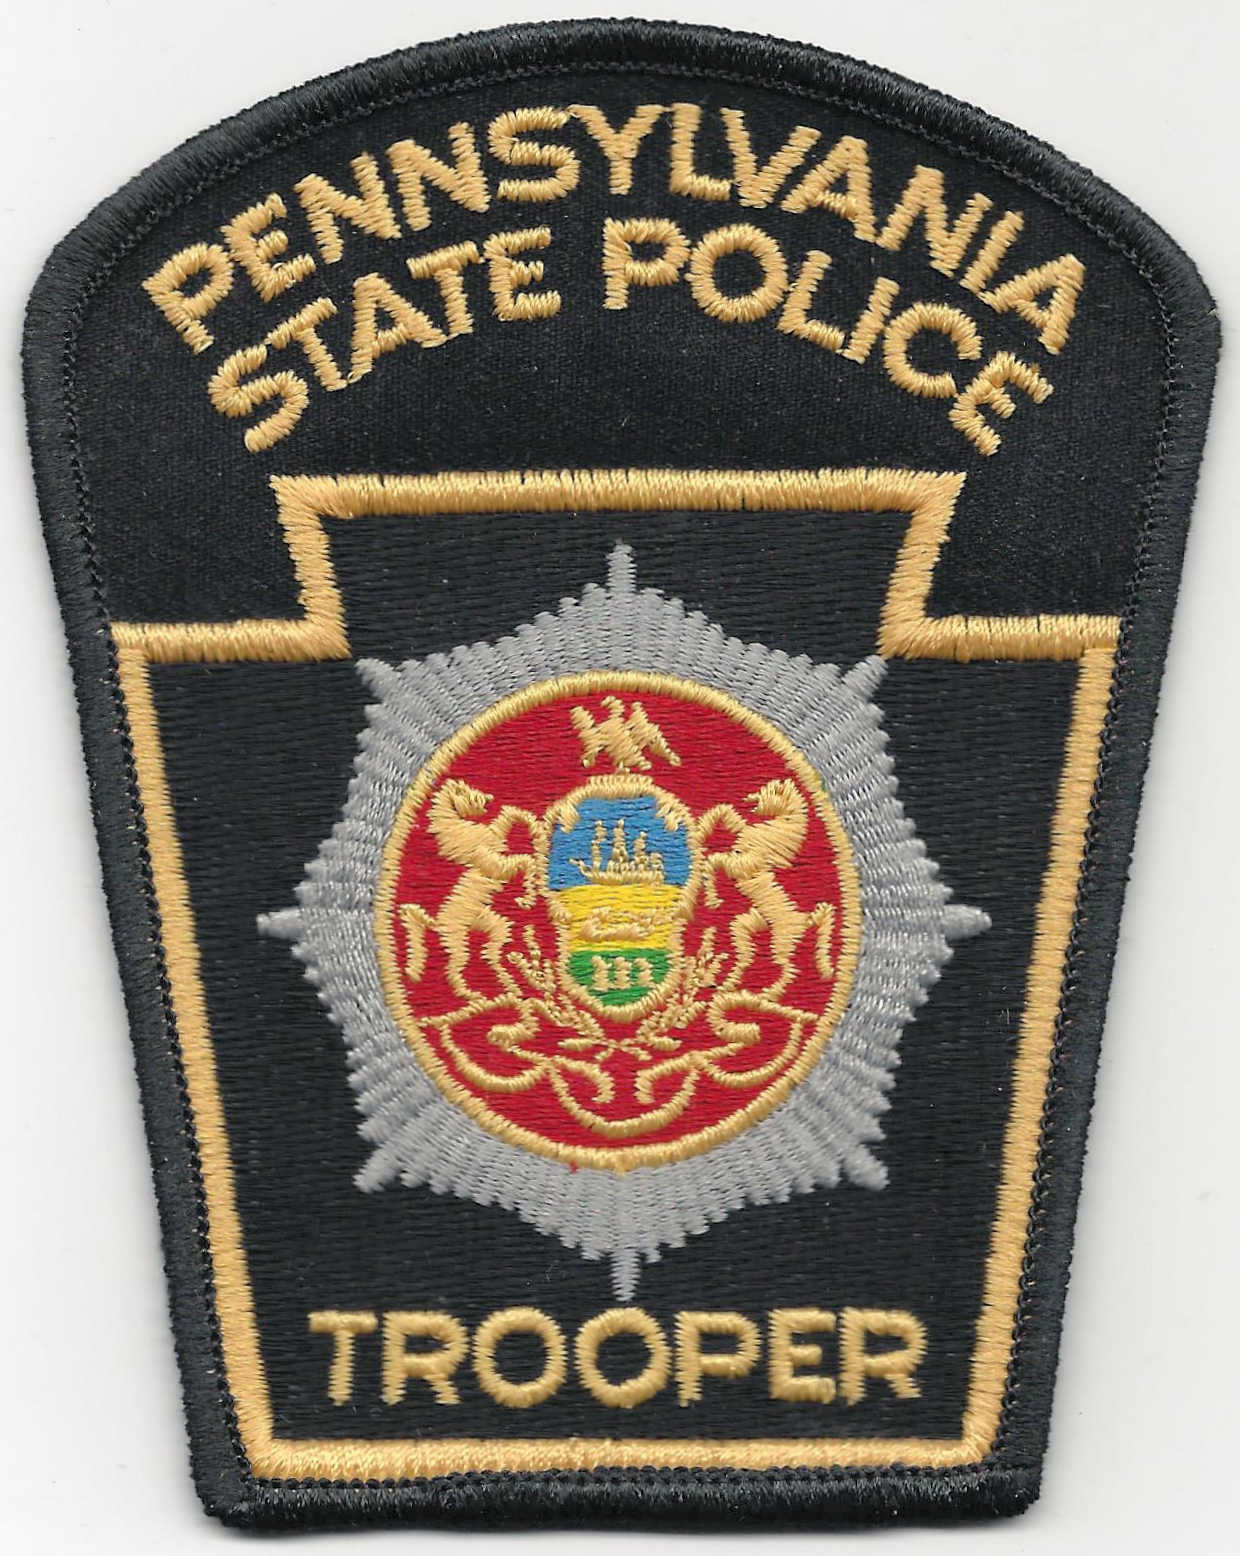 Pennsylvania State Police - Trooper Patch